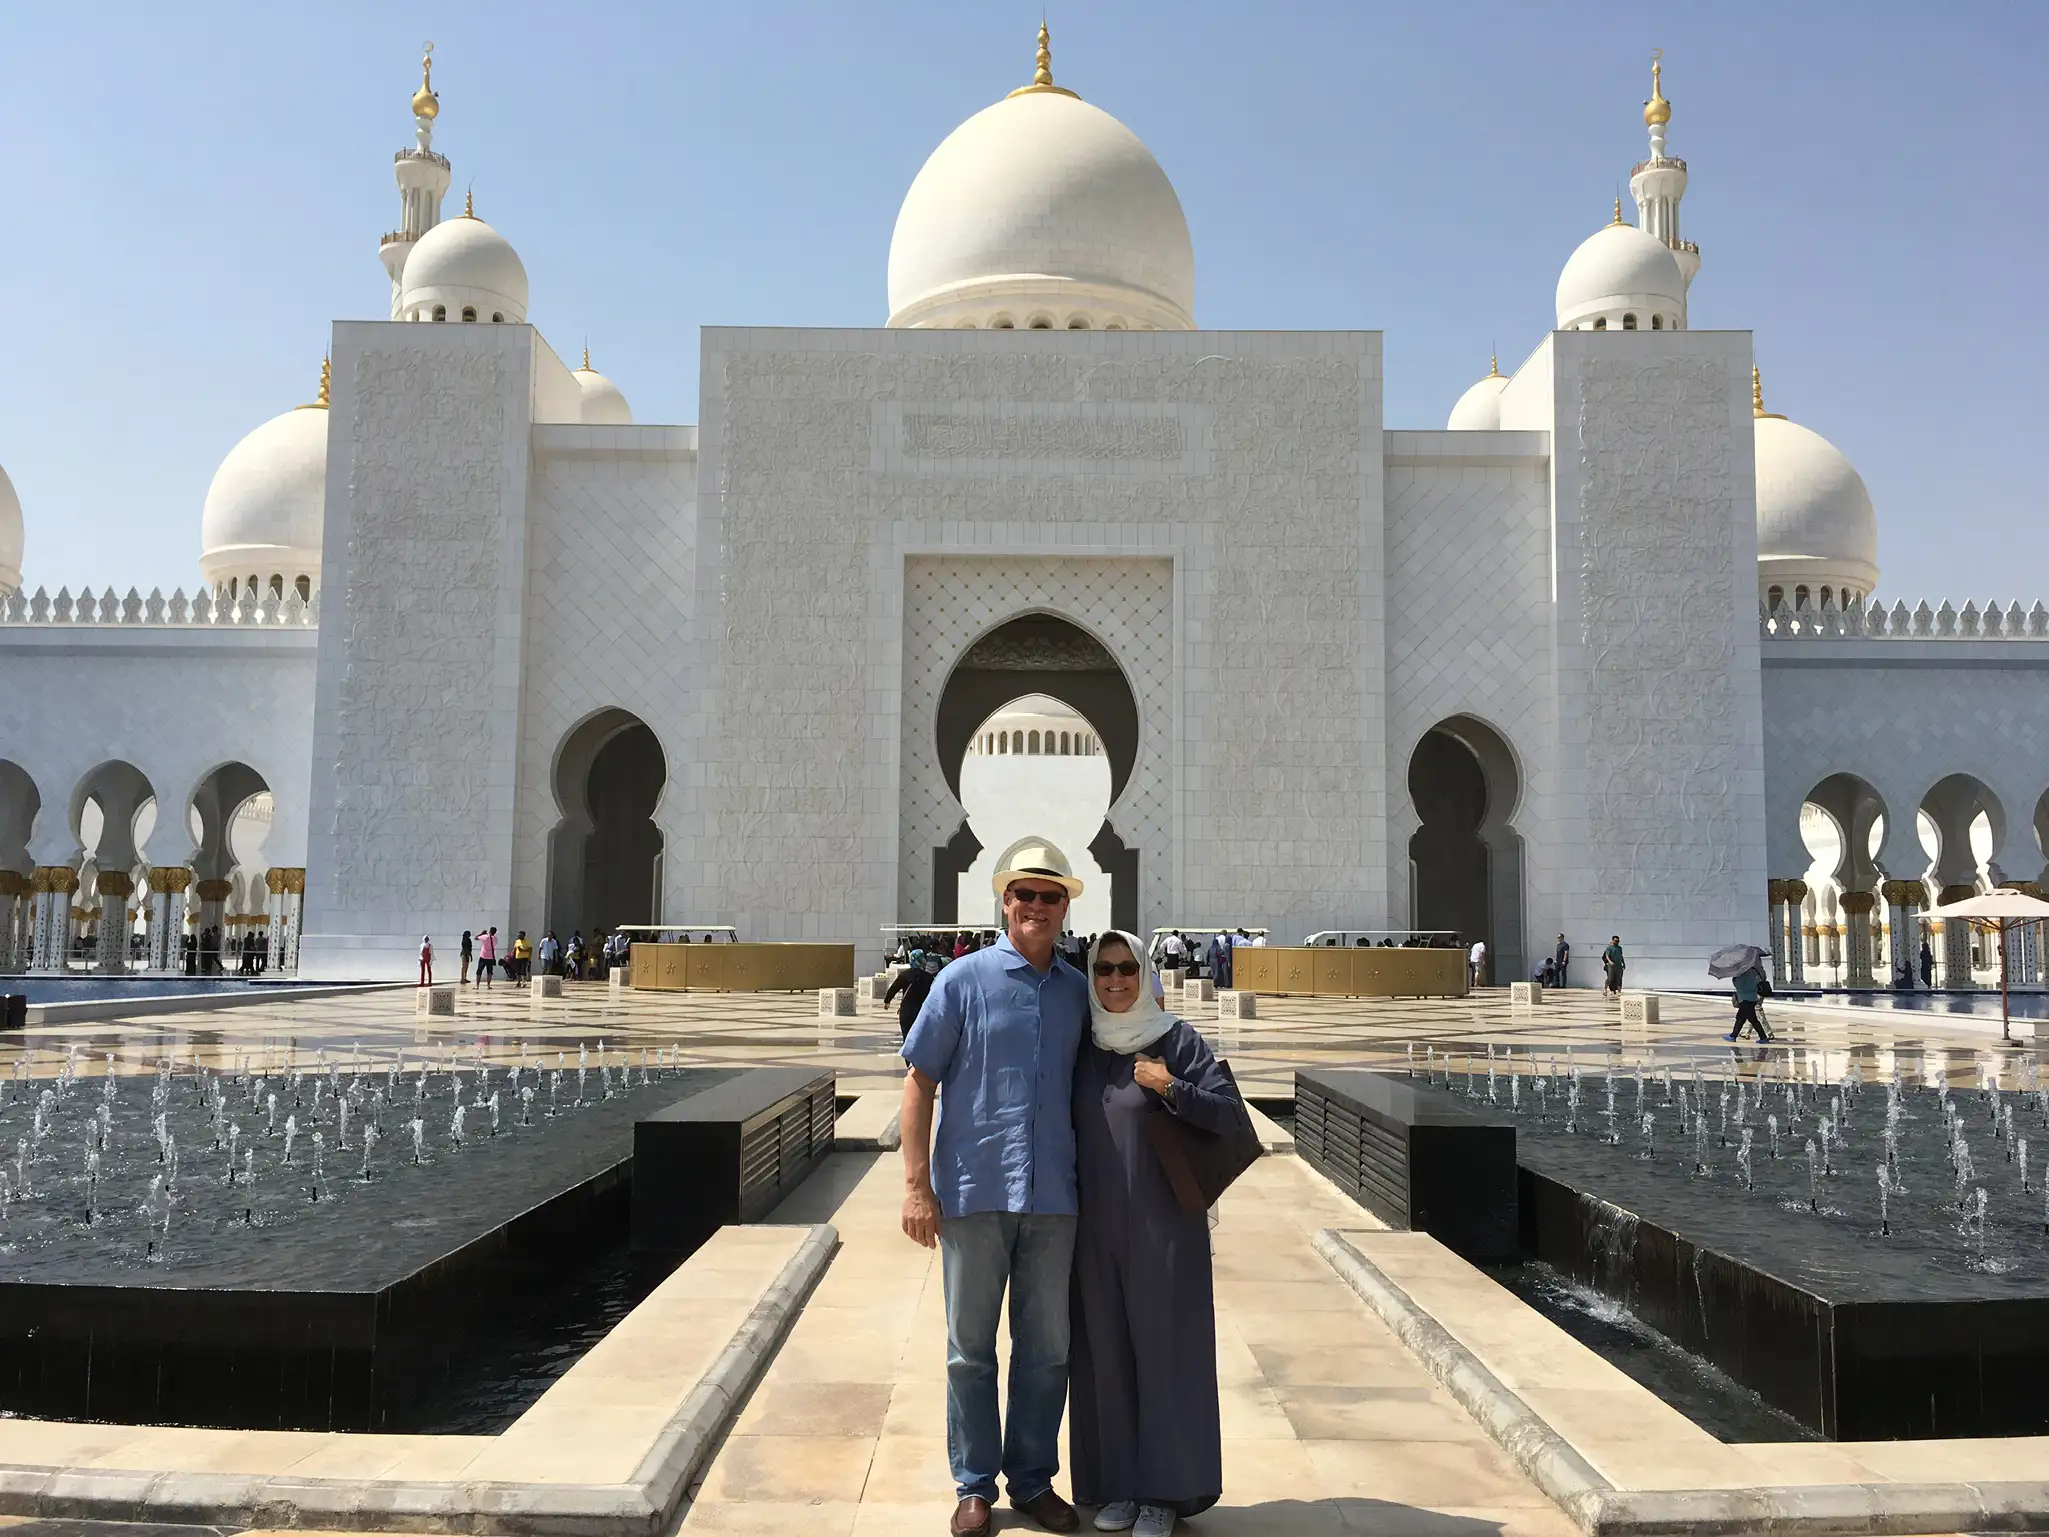 Dona Dower and her husband in front of The Grand Mosque in Abu Dhabi